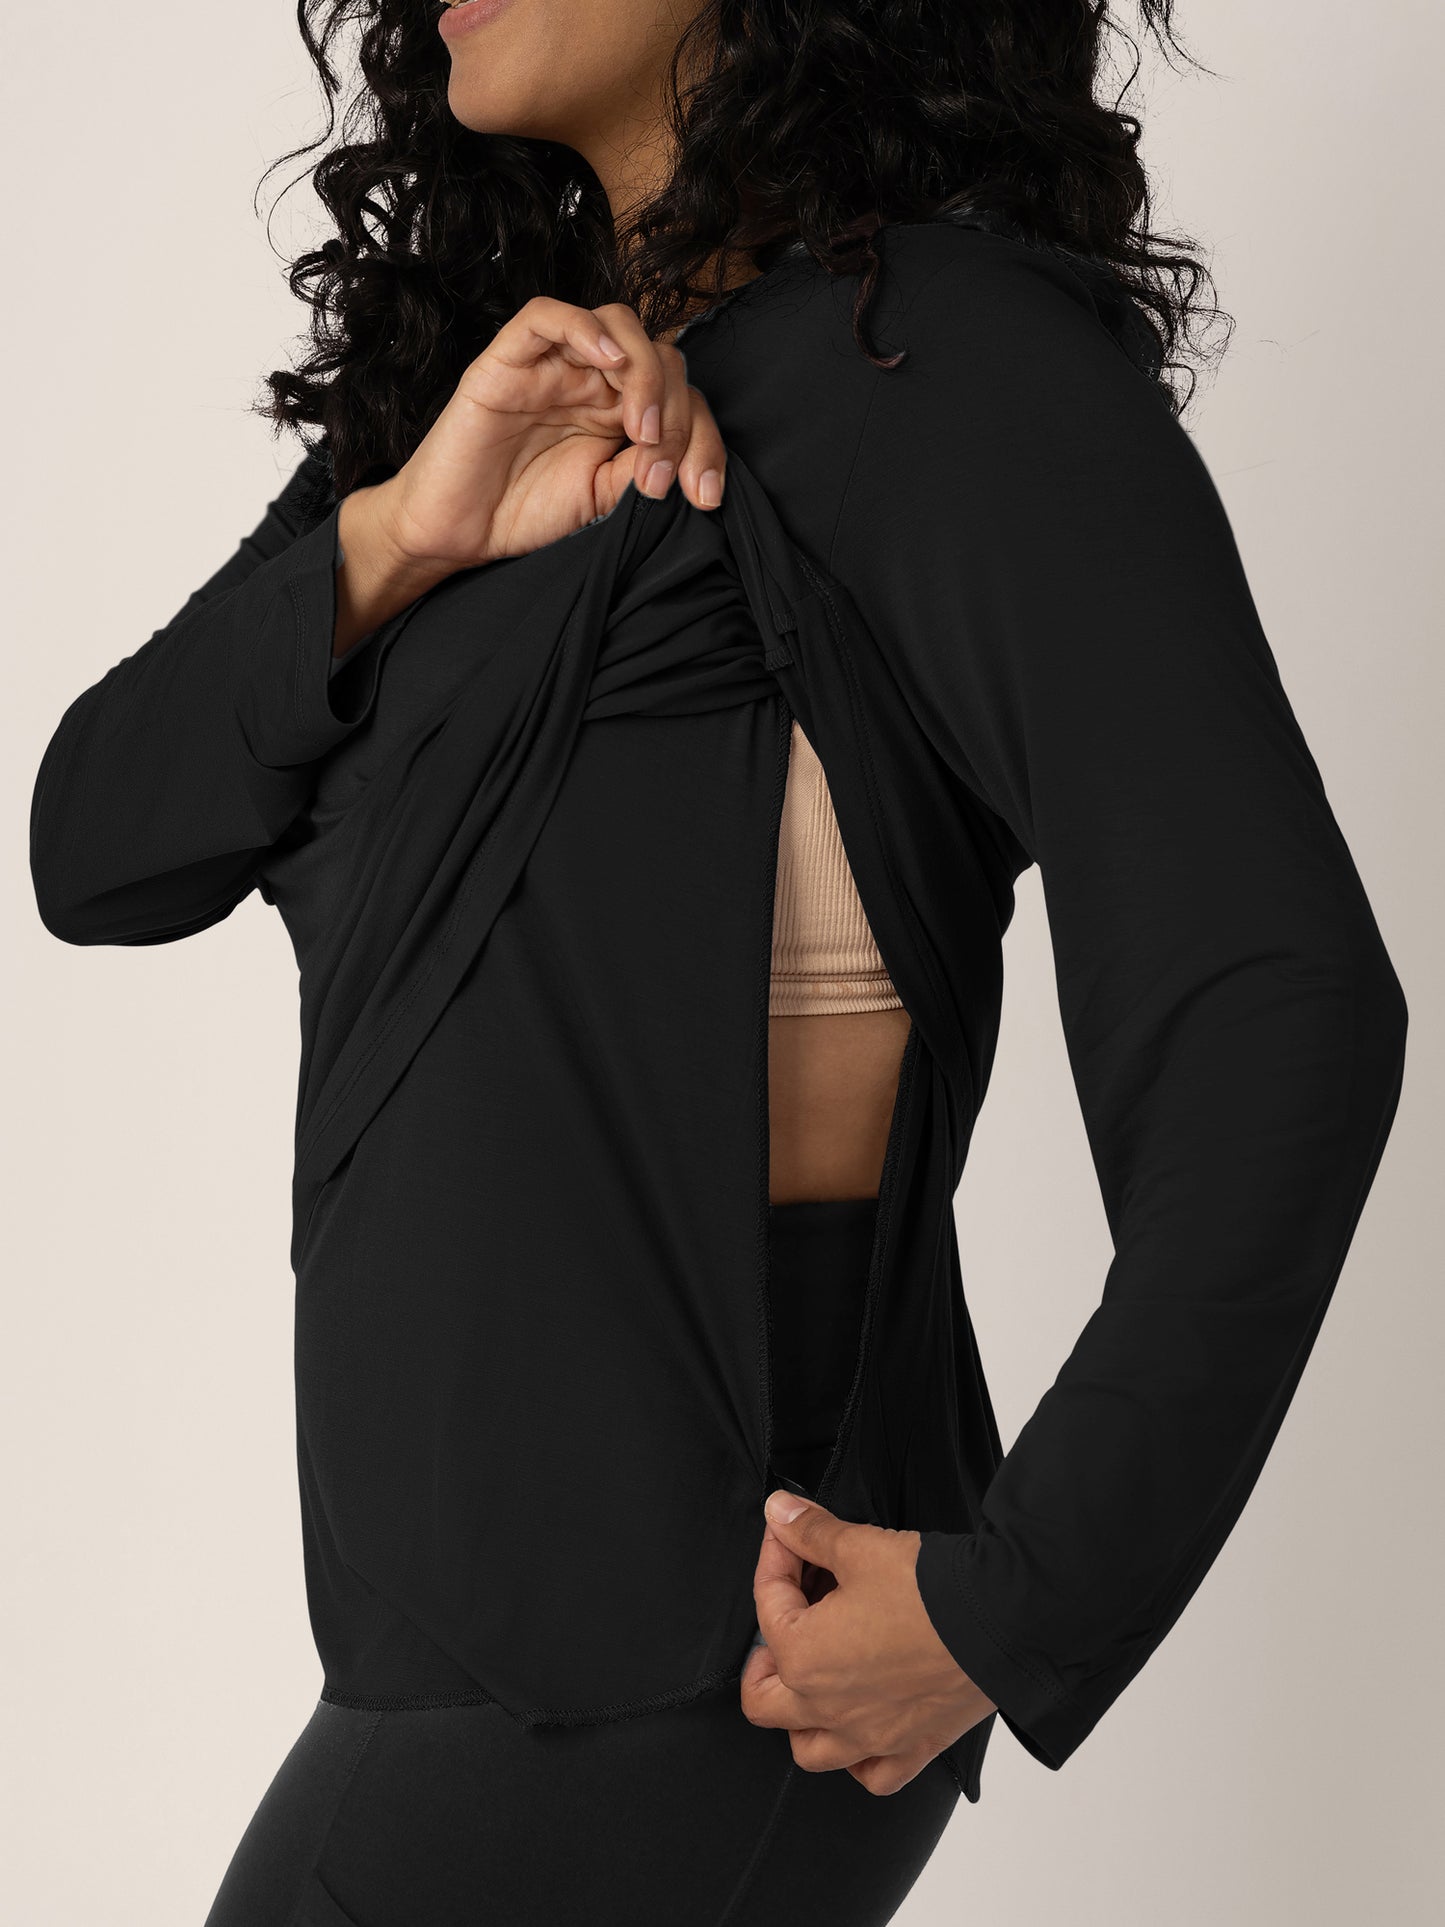 Model wearing the Bamboo Maternity & Nursing Long Sleeve T-Shirt in Black showing the easy pull up nursing access.